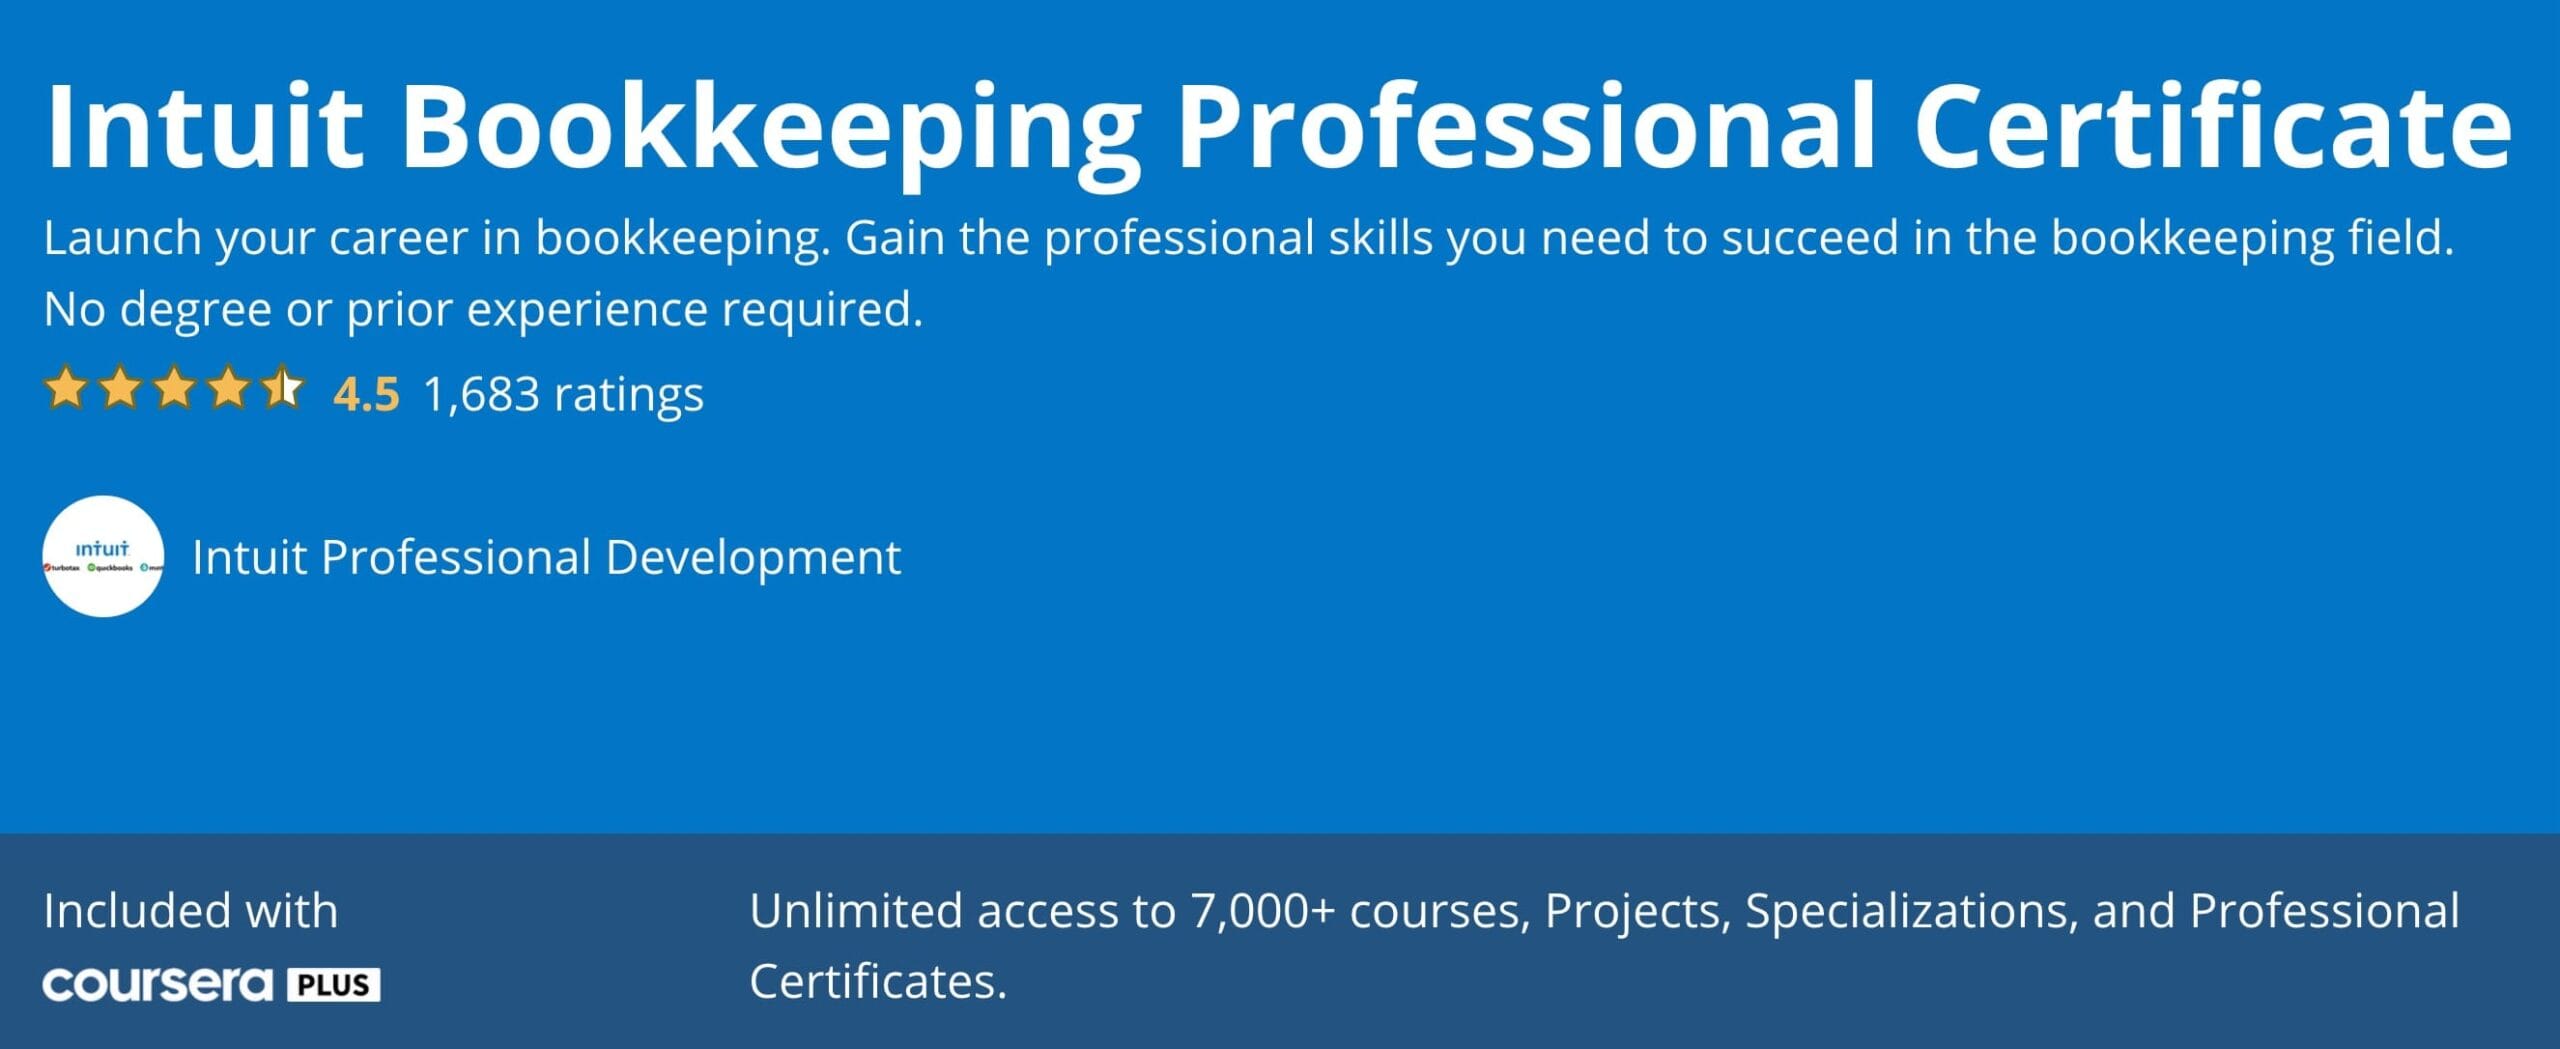 Intuit Bookkeeping Professional Certificate